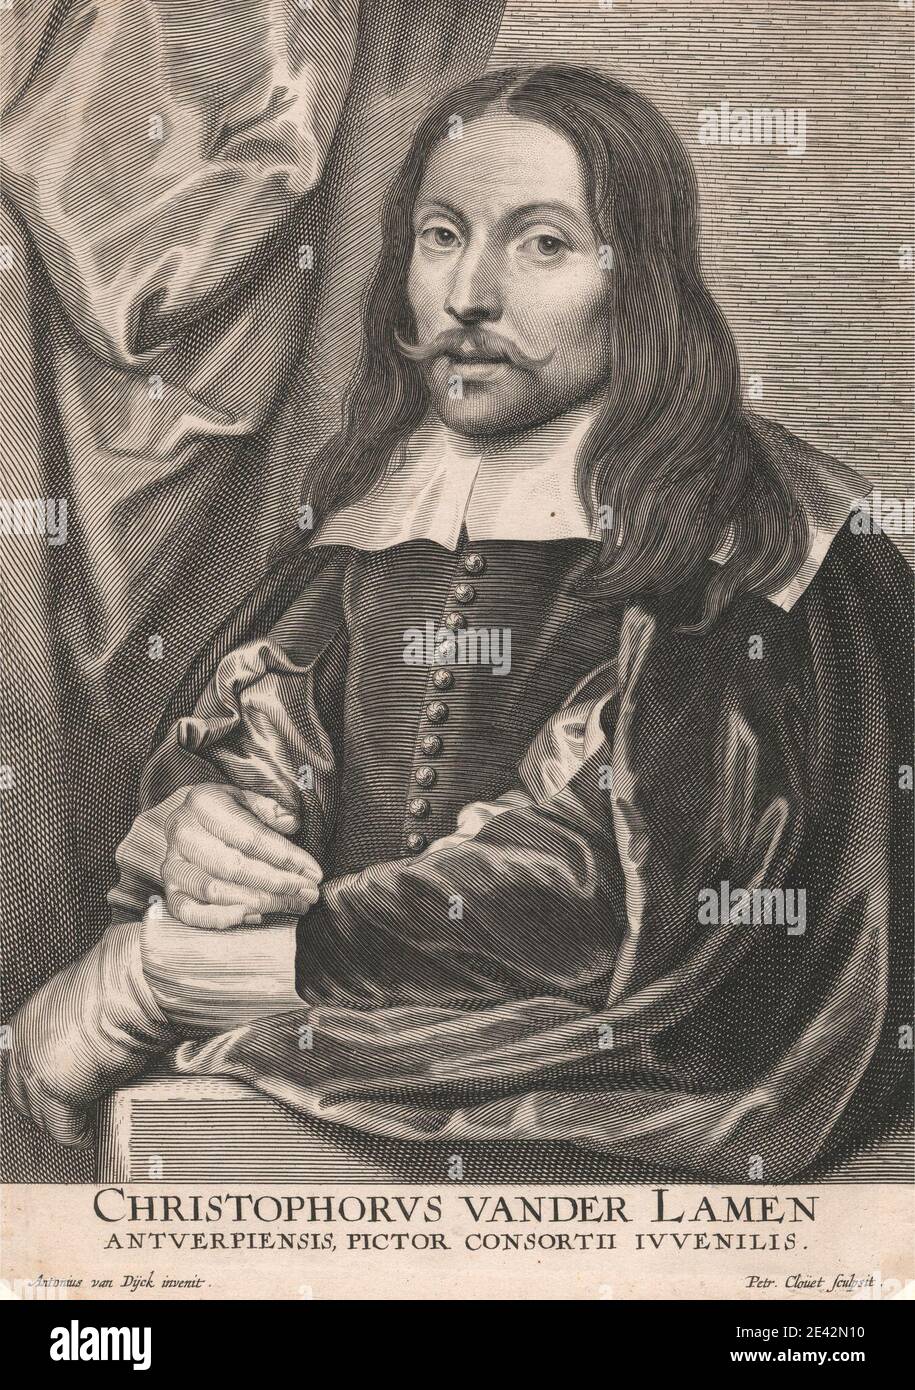 Peter Clouet, 1629â€“1670, Flemish, Christophorus van der Lamen Antuerpiensis, Pictor Consortii Juvenilis, ca.1635. Line engraving and stipple engraving on medium, slightly textured, browned white, laid paper, mounted on, moderately thick, slightly textured, cream, laid paper. Stock Photo